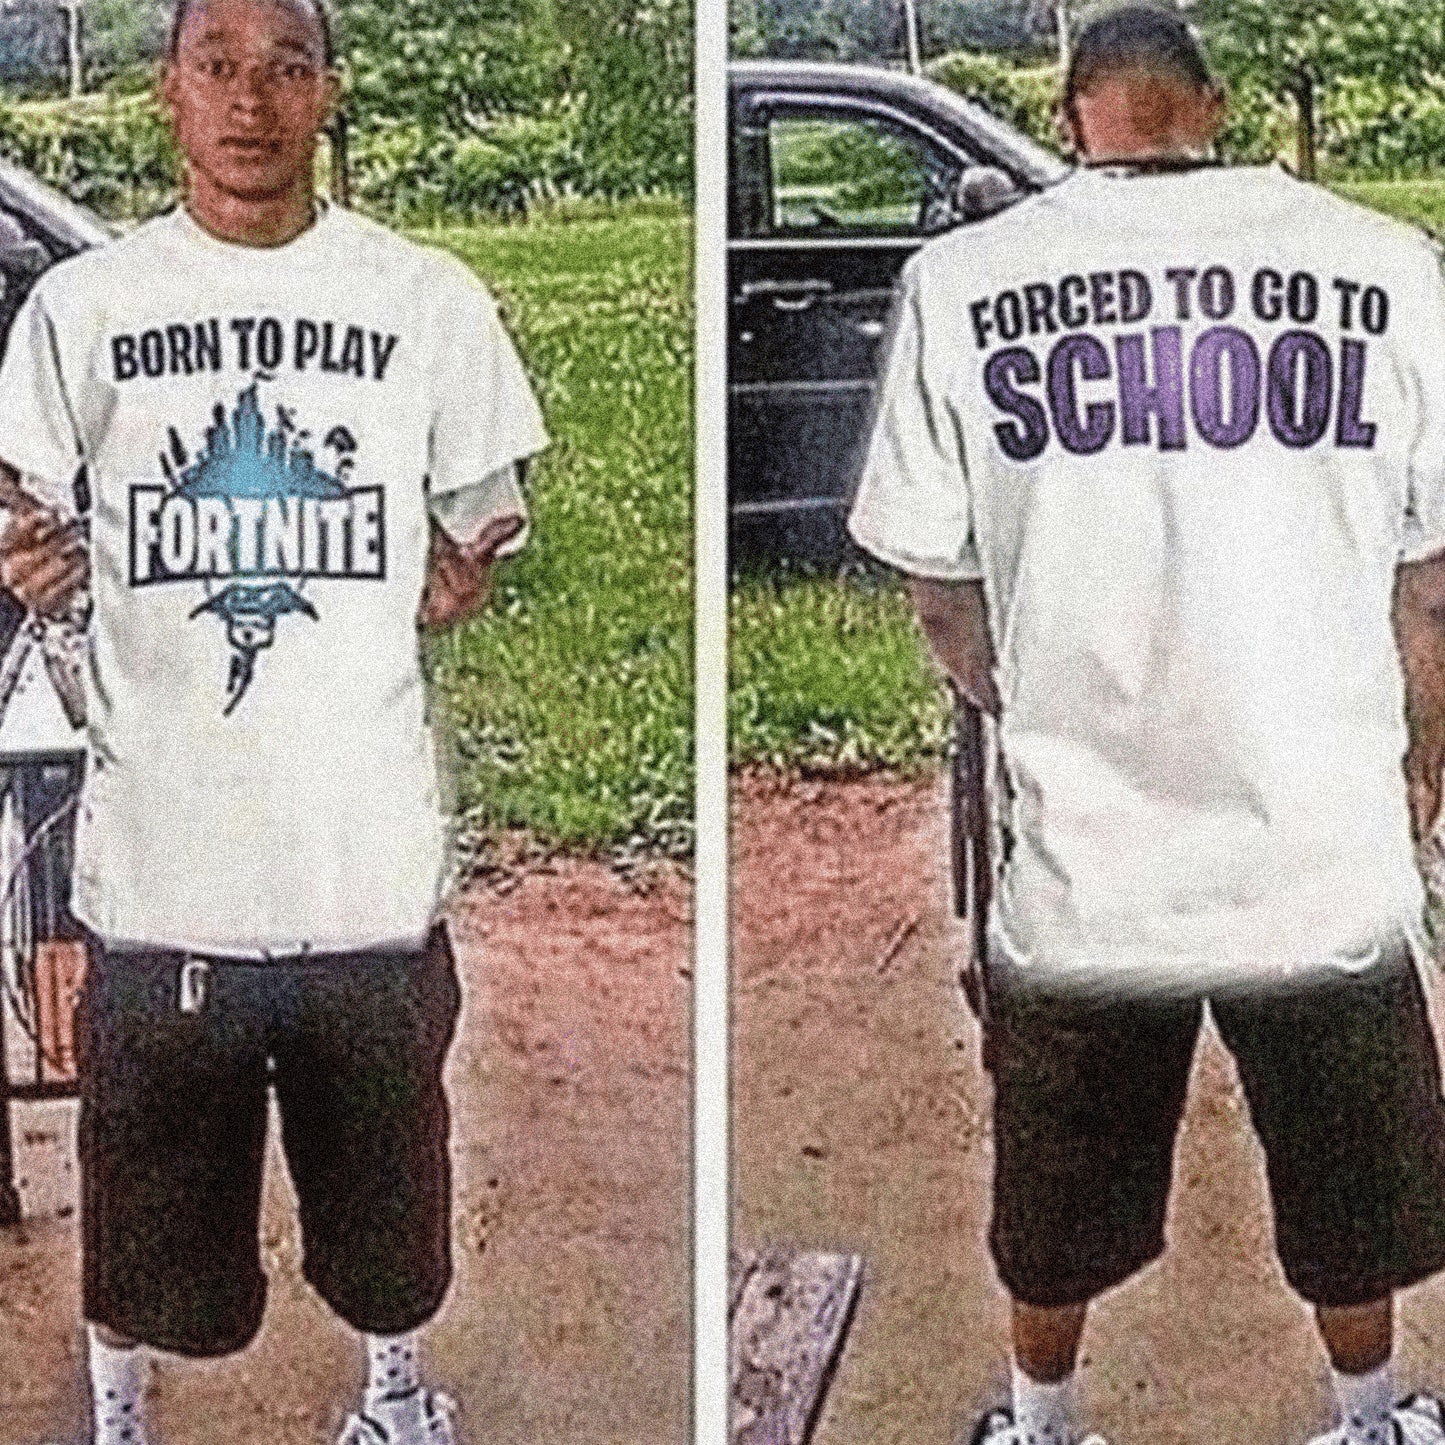 BORN TO PLAY FORTNITE, FORCED TO GO TO SCHOOL TEE